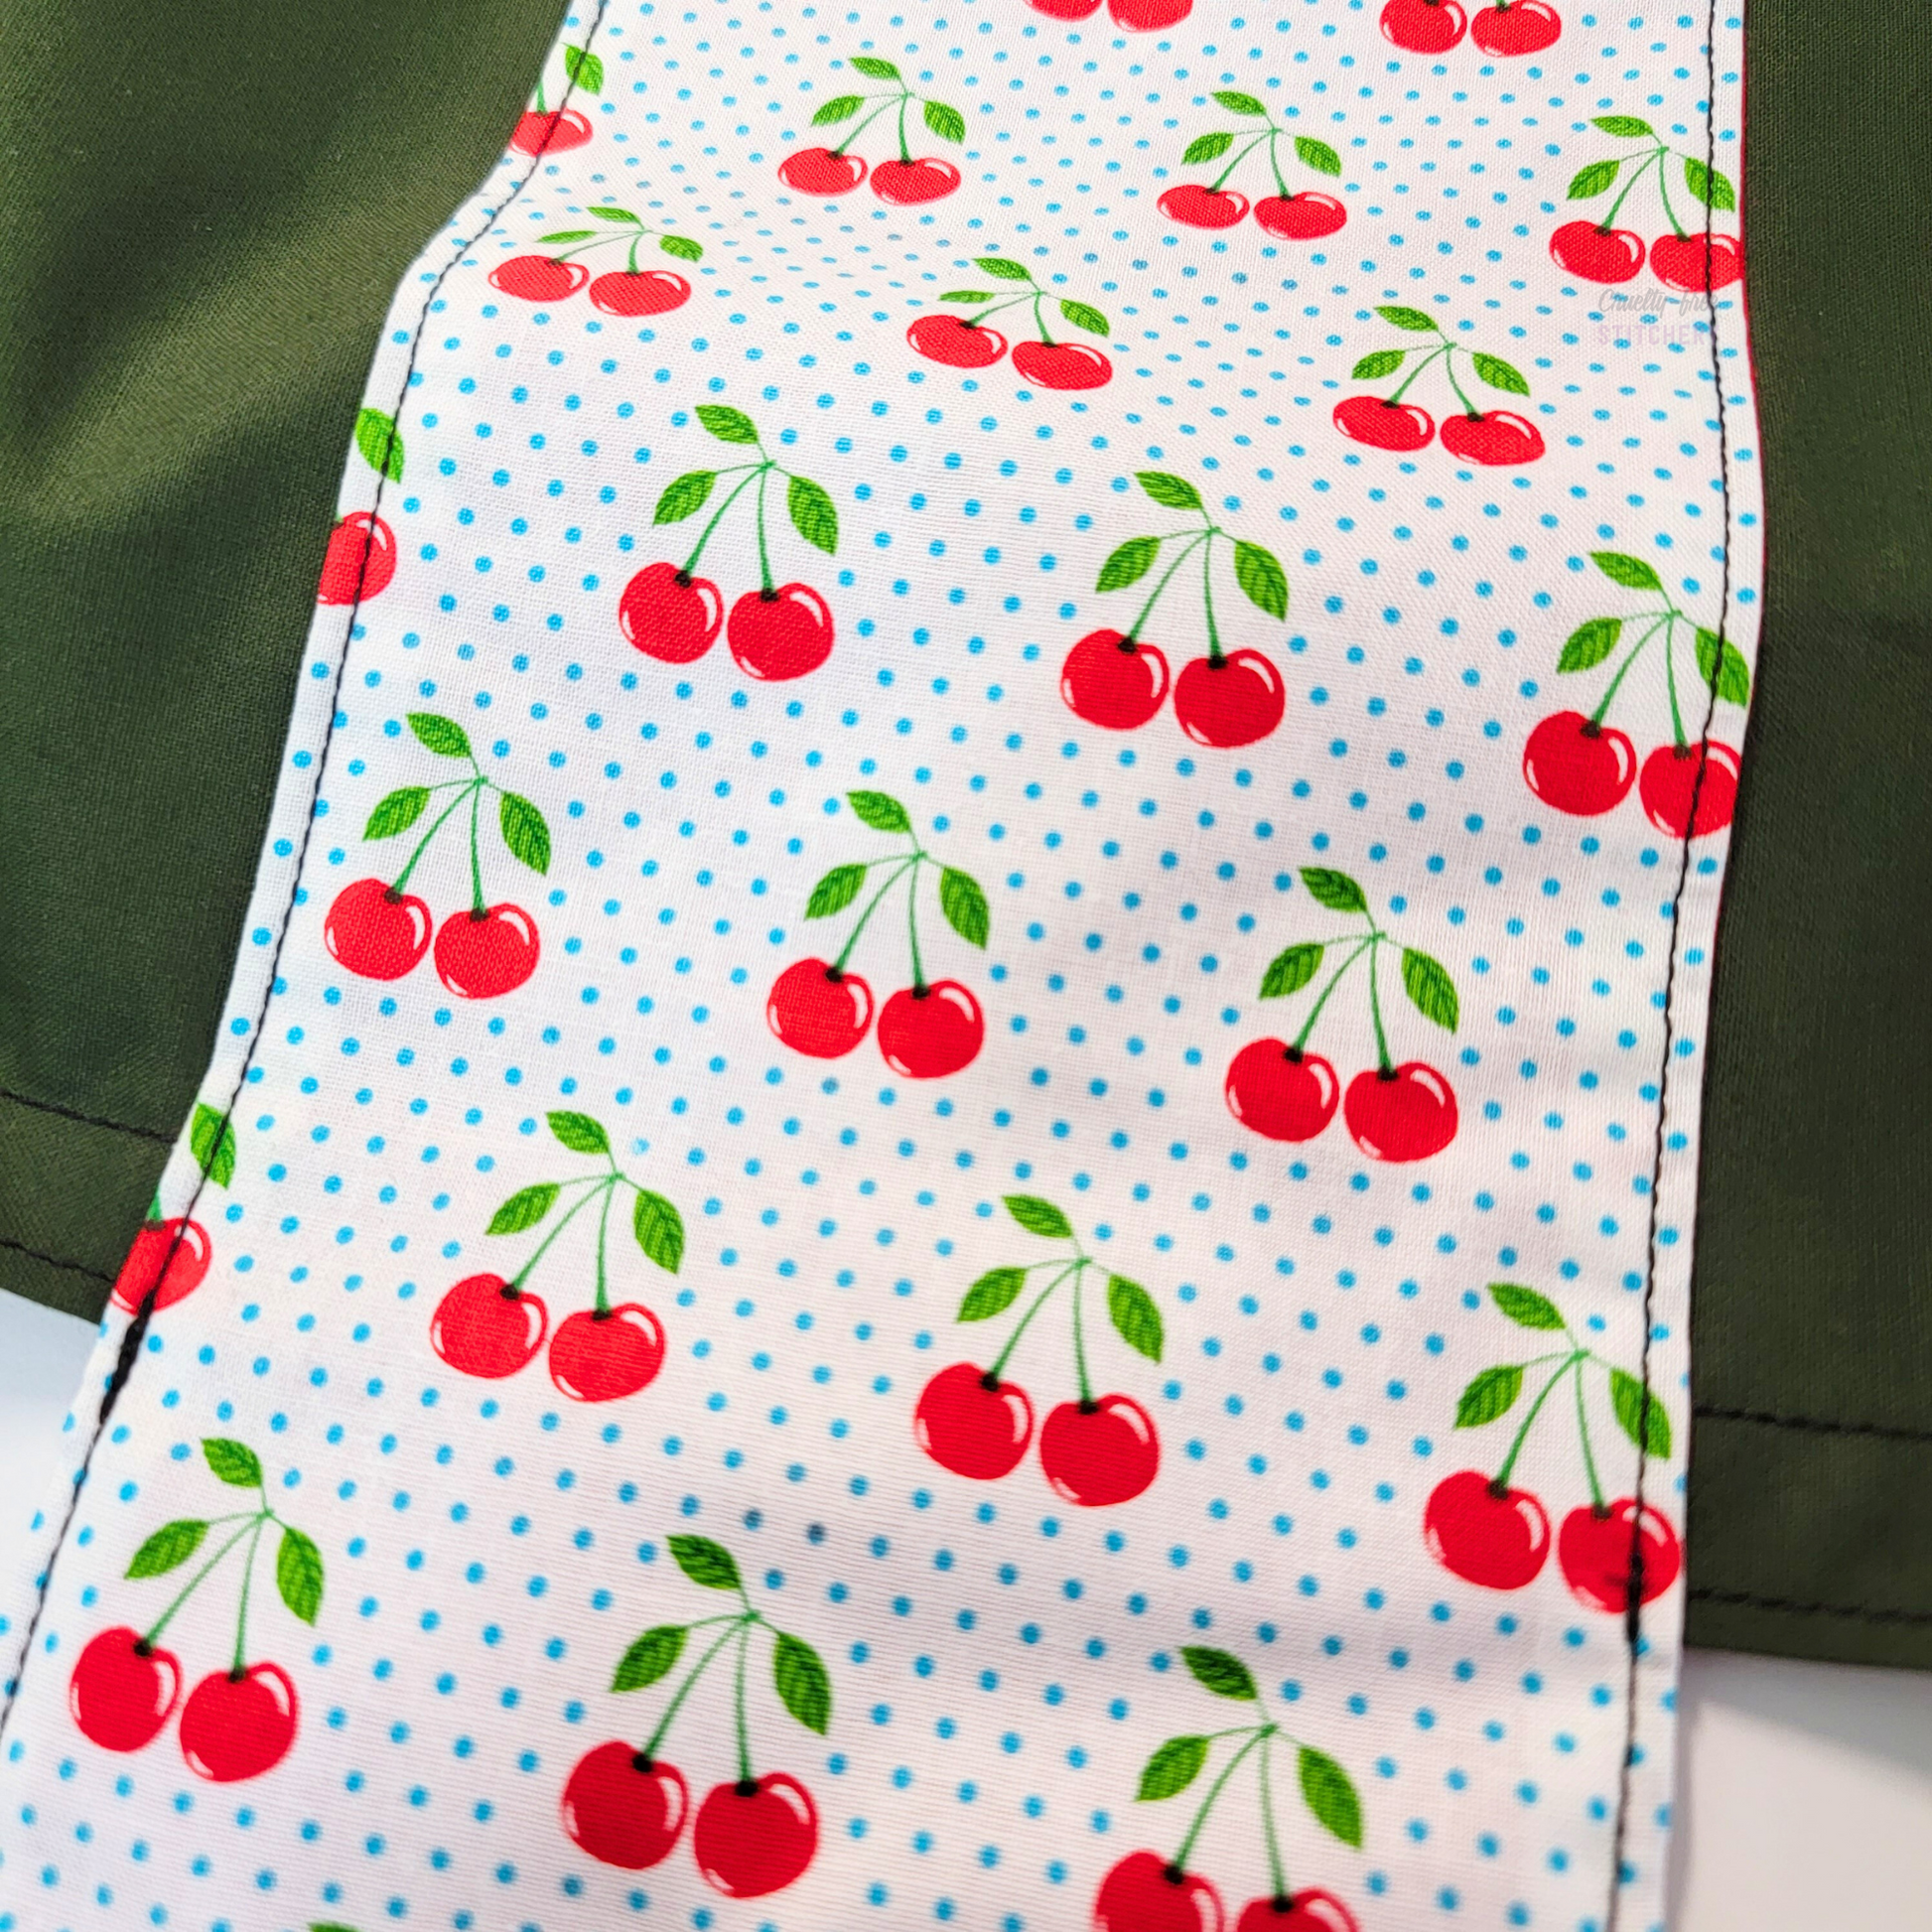 A close-up of the retro-inspired cherry print.